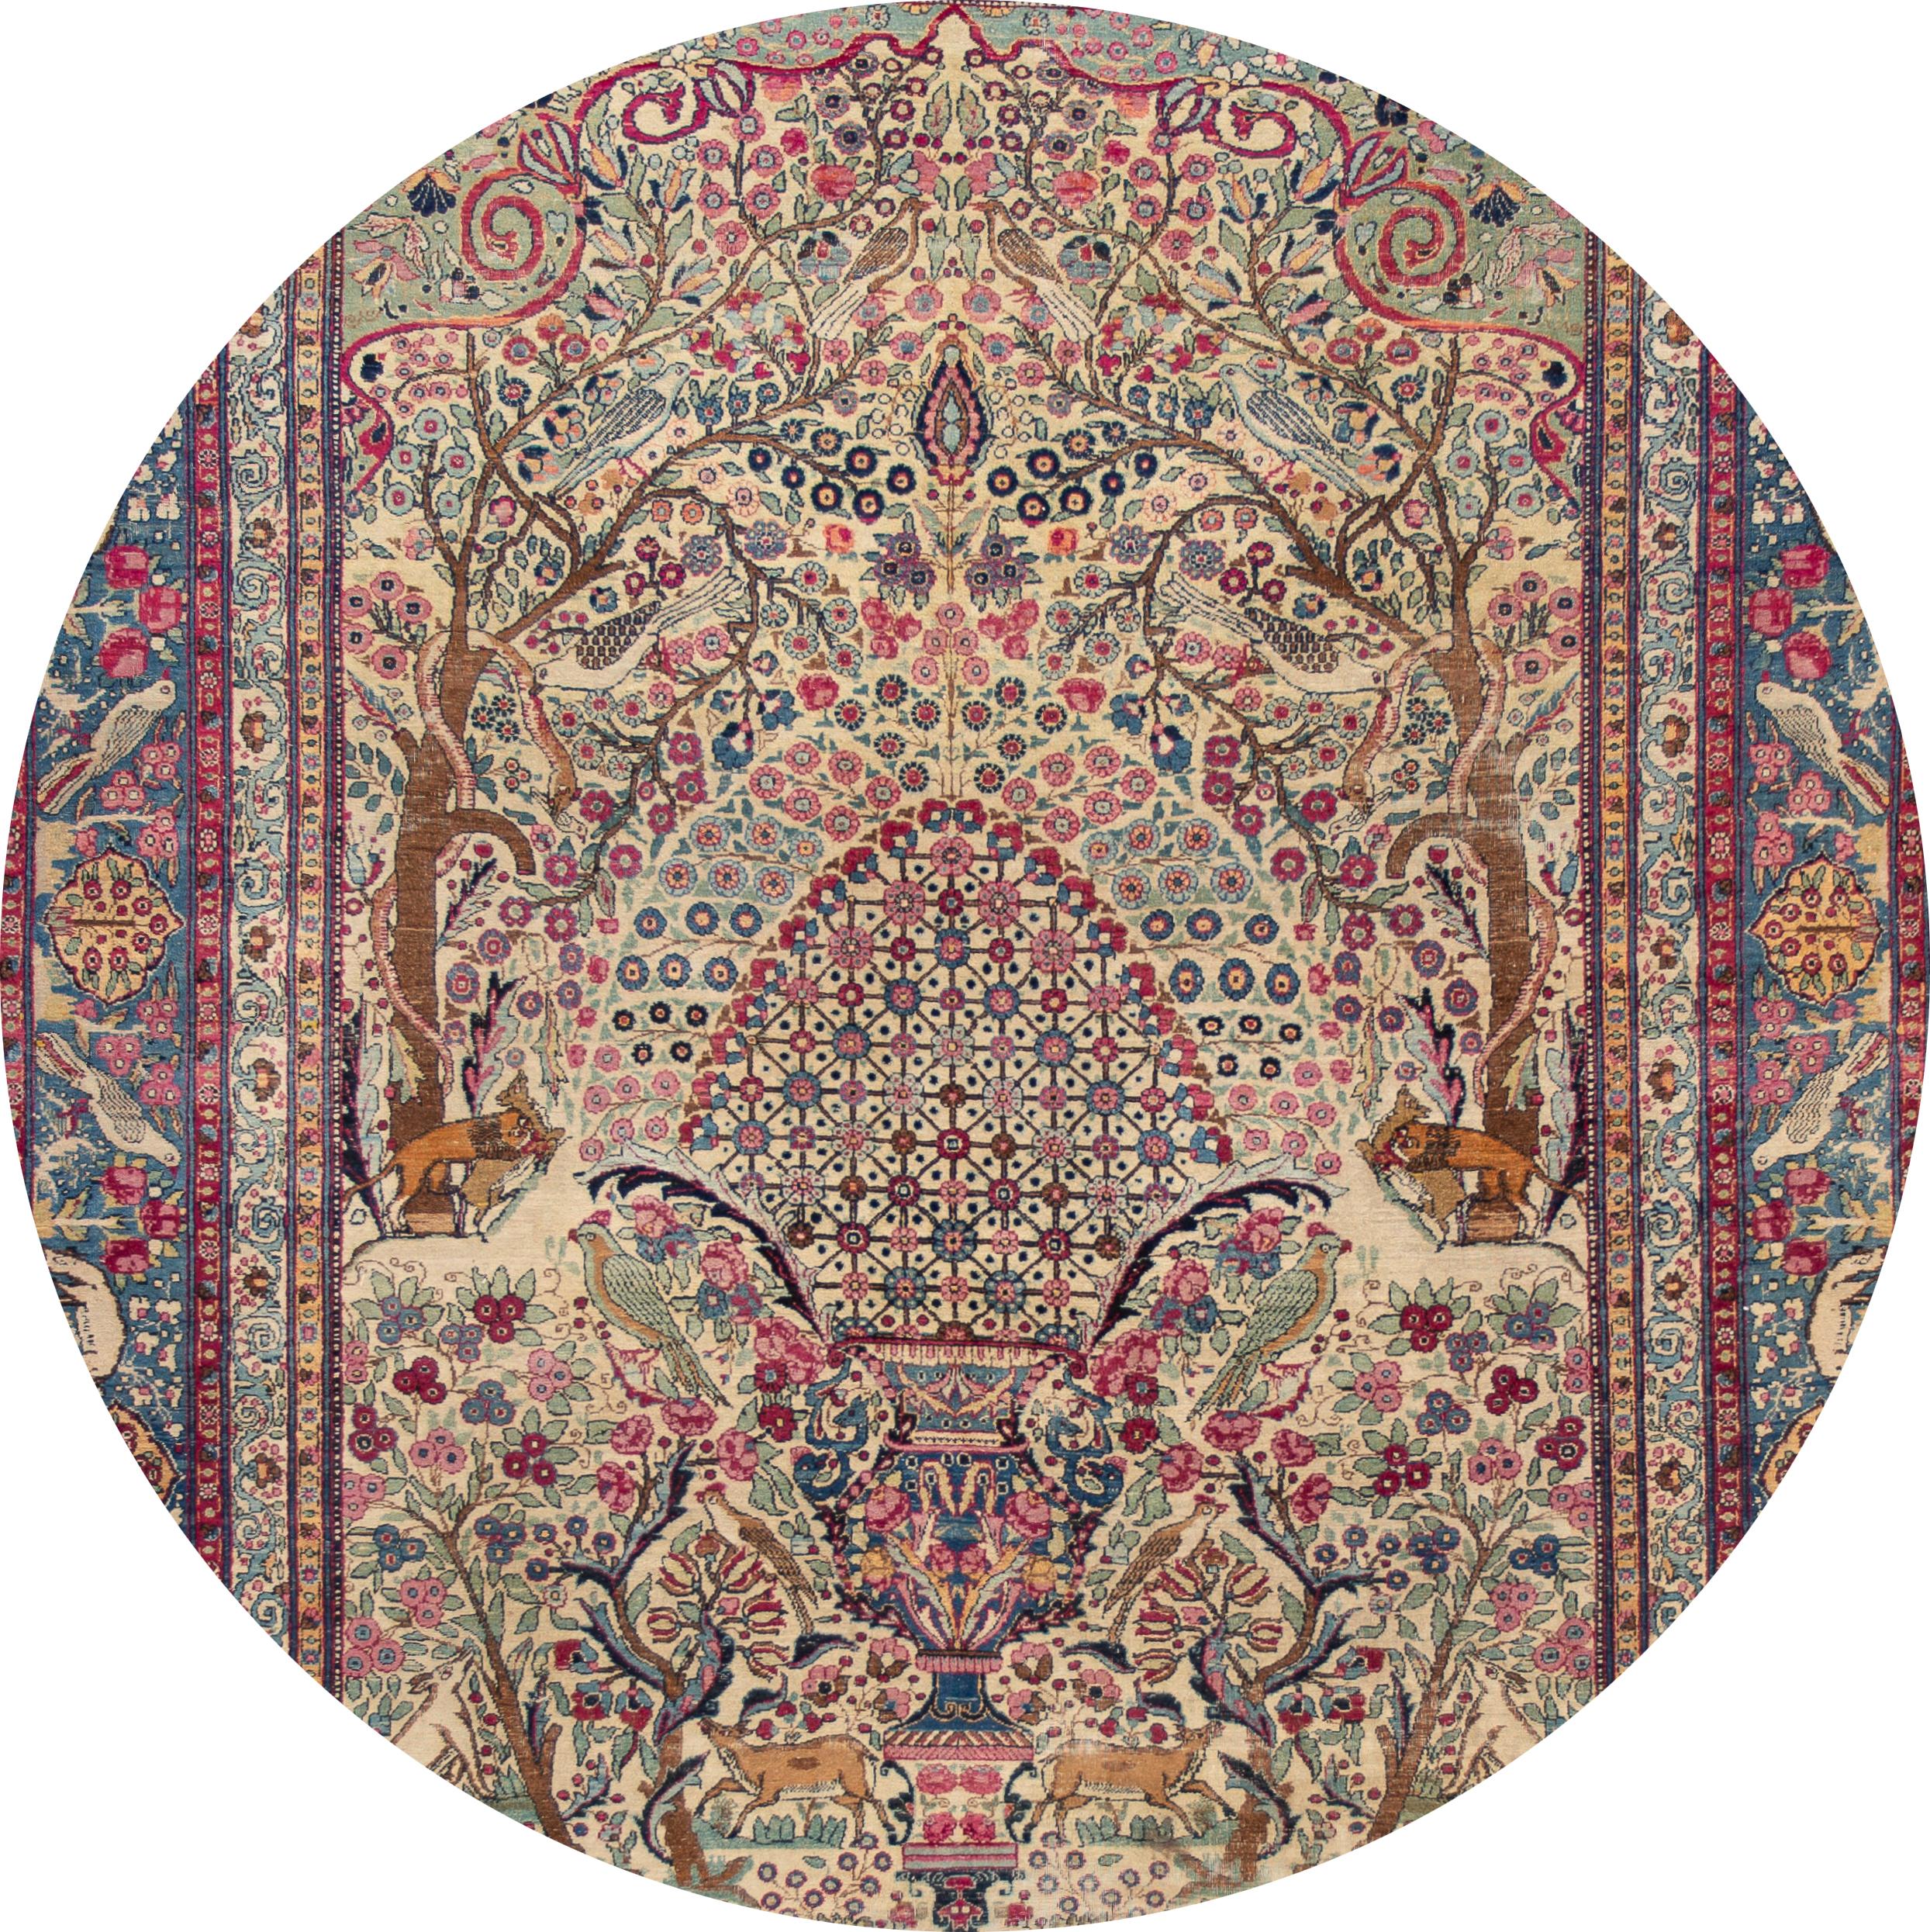 Beautiful antique Tehran rug, hand knotted wool with an ivory field, pink and blue accents in an all-over nature pictorial design, circa 1920
This rug measures 7' 4